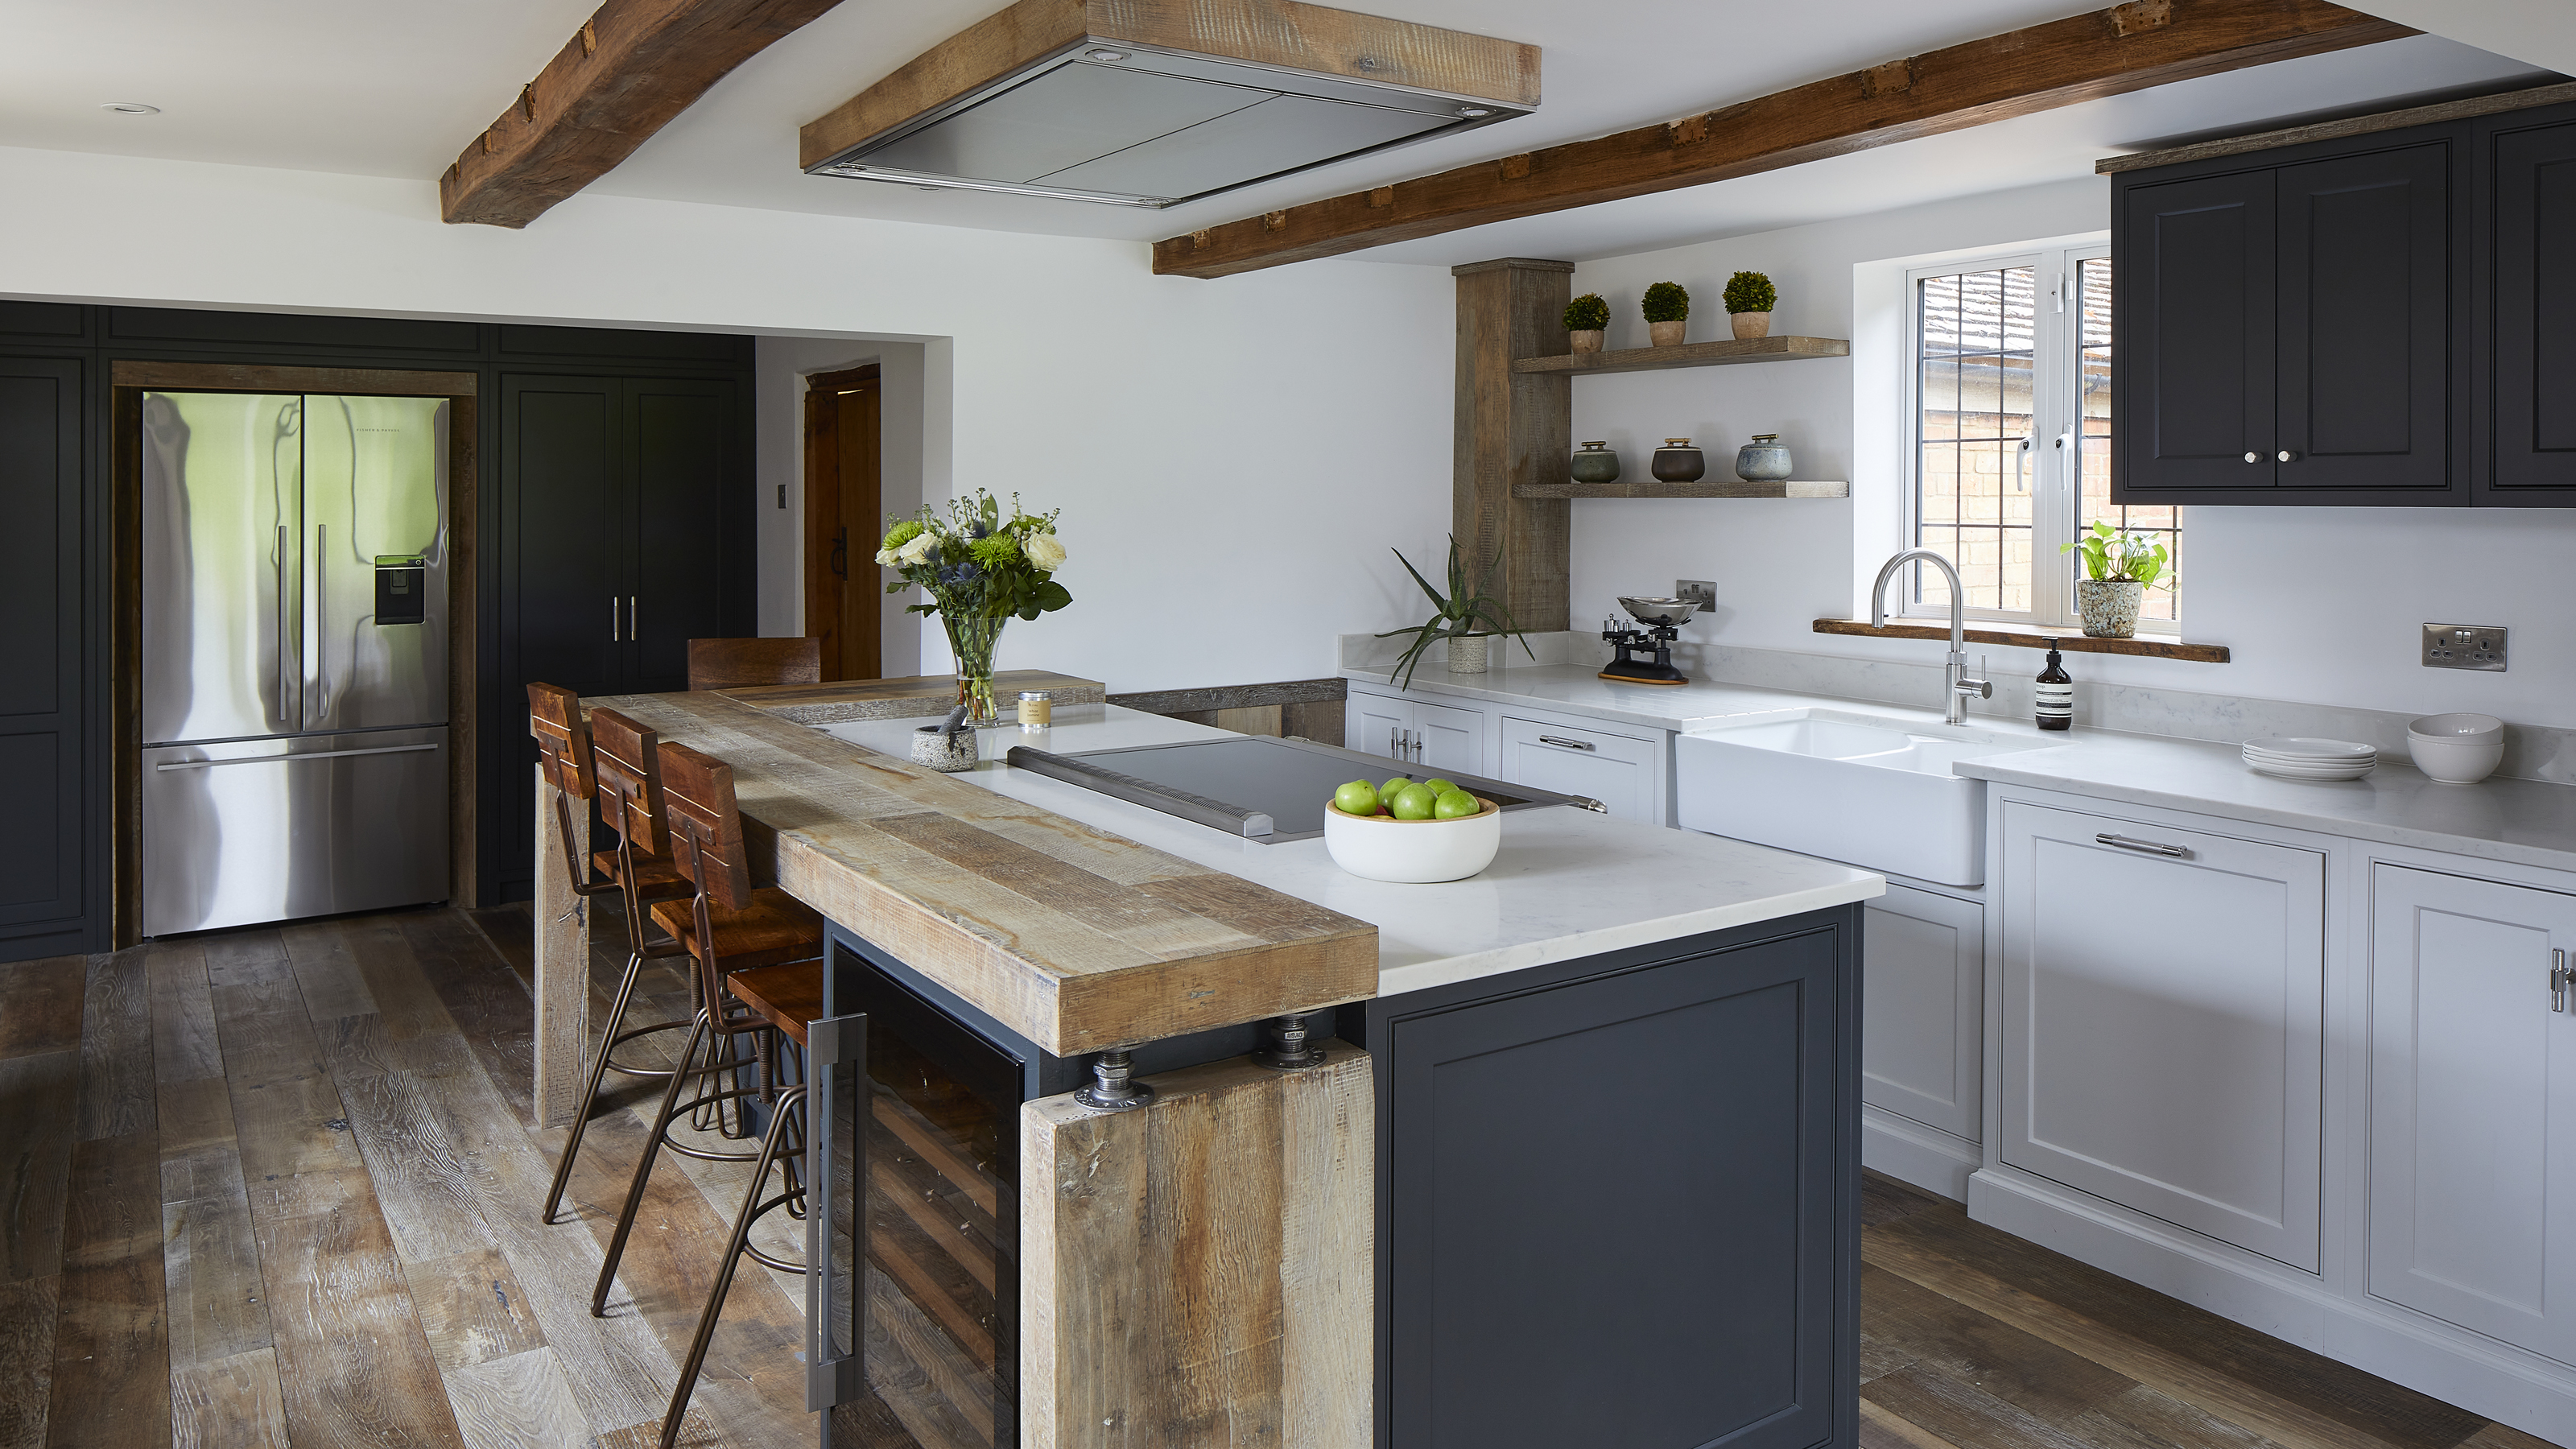 18 design tips from a Sussex kitchen filled with rustic charm ...